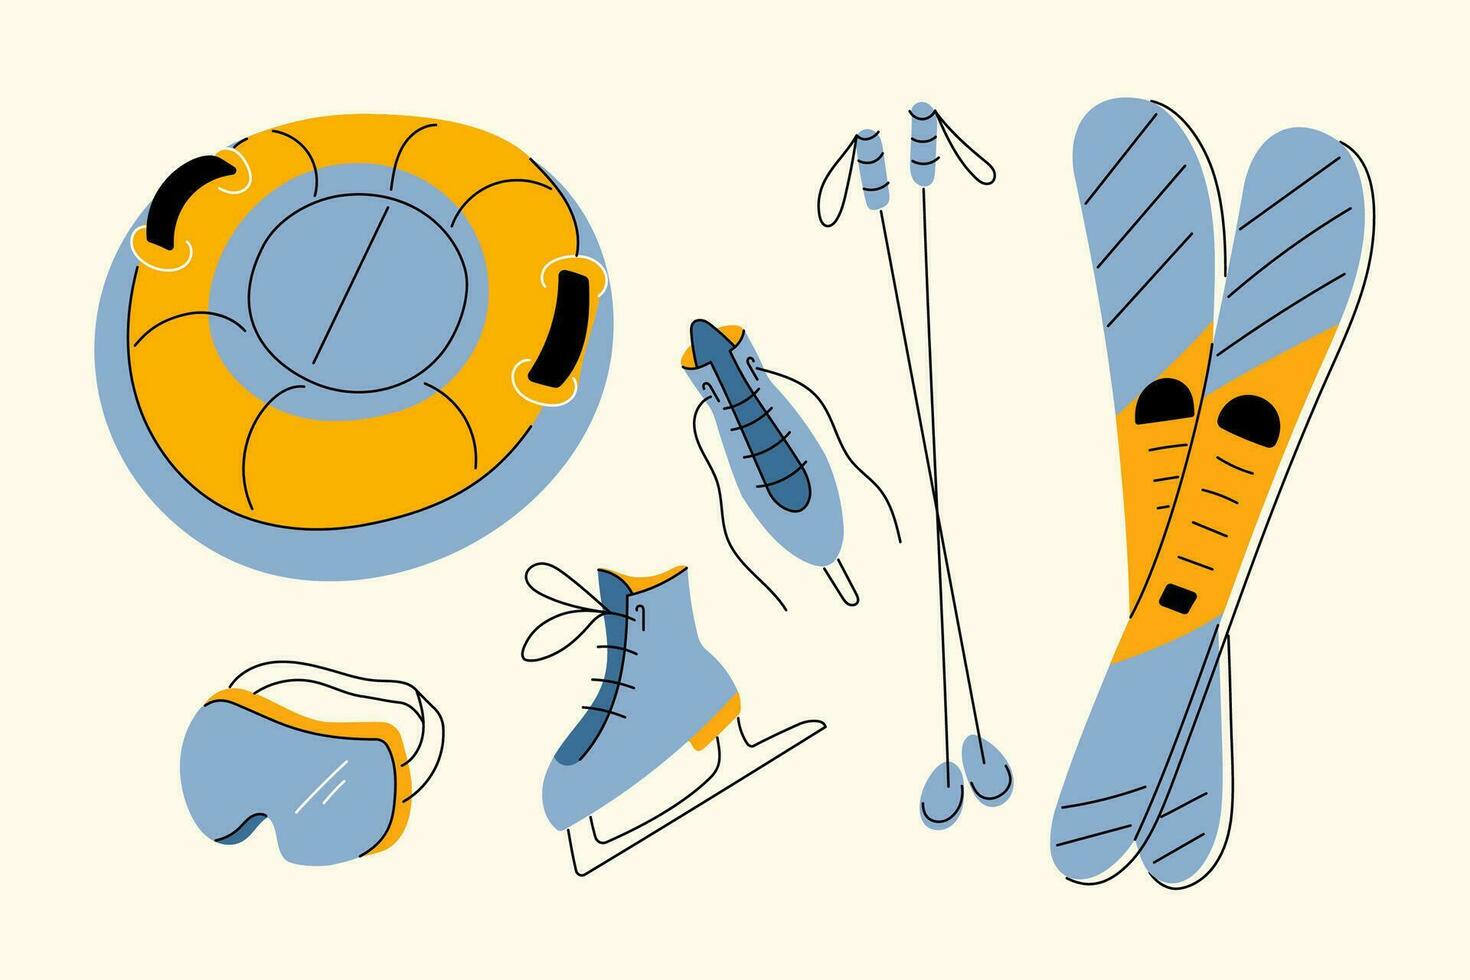 Skates, skis with poles, tube and protective mask. Winter family outdoor sport activity elements set. Modem hand drawn flat style vector illustrations.